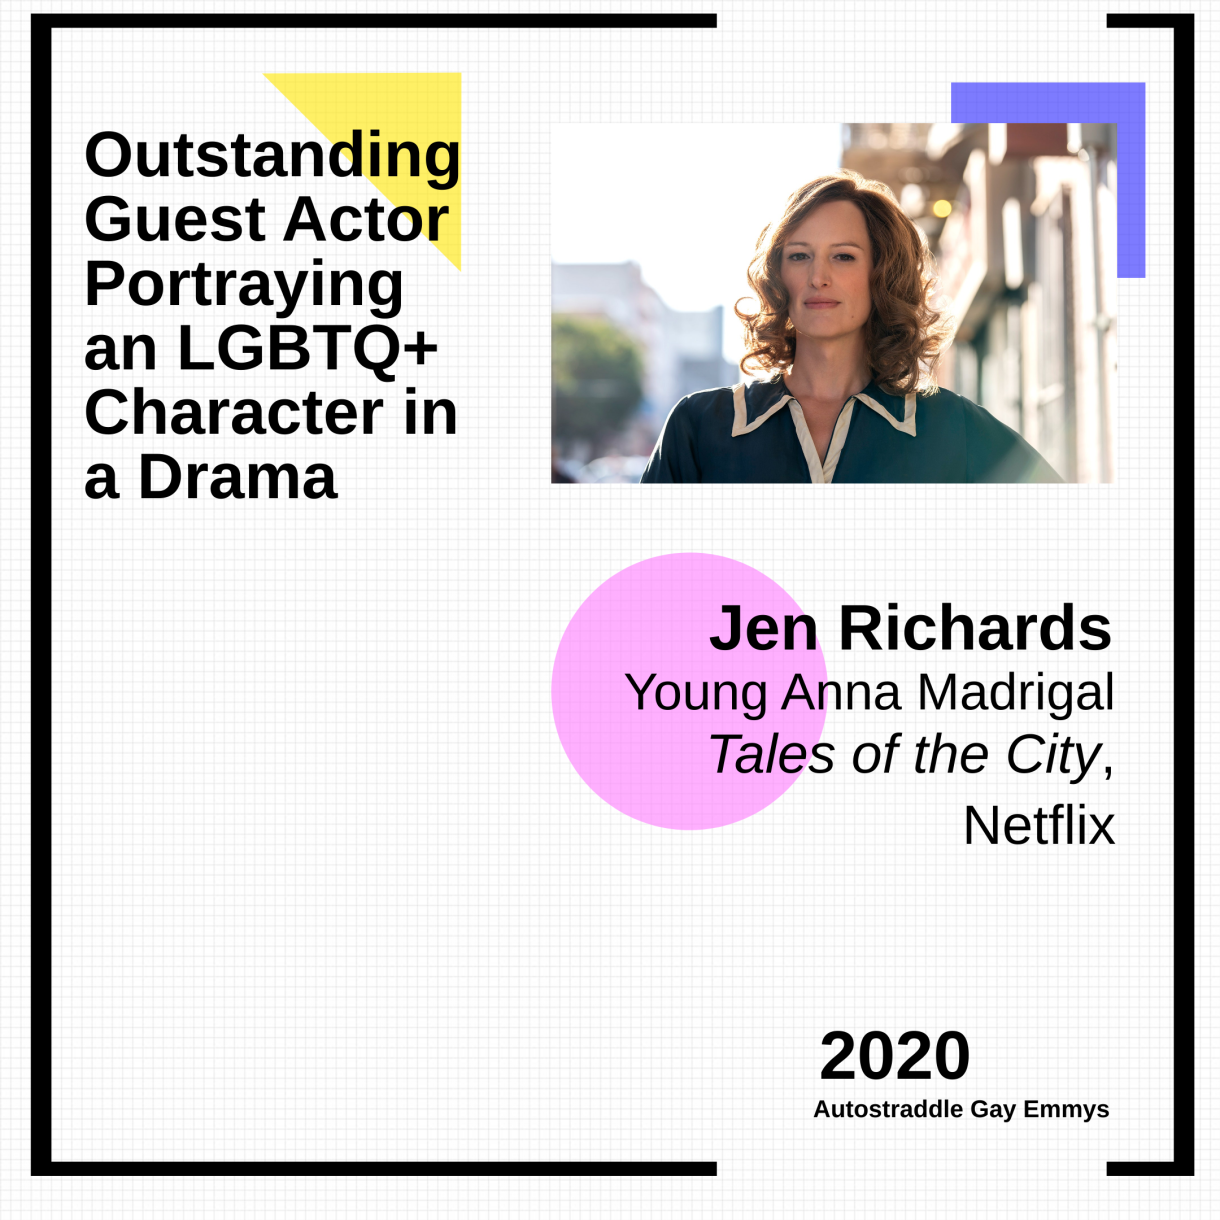 Graphic announcing Outstanding Guest Actor playing an LGBTQ+ Character in a Drama Series: Jen Richards as Young Anna Madrigal, Tales of the City